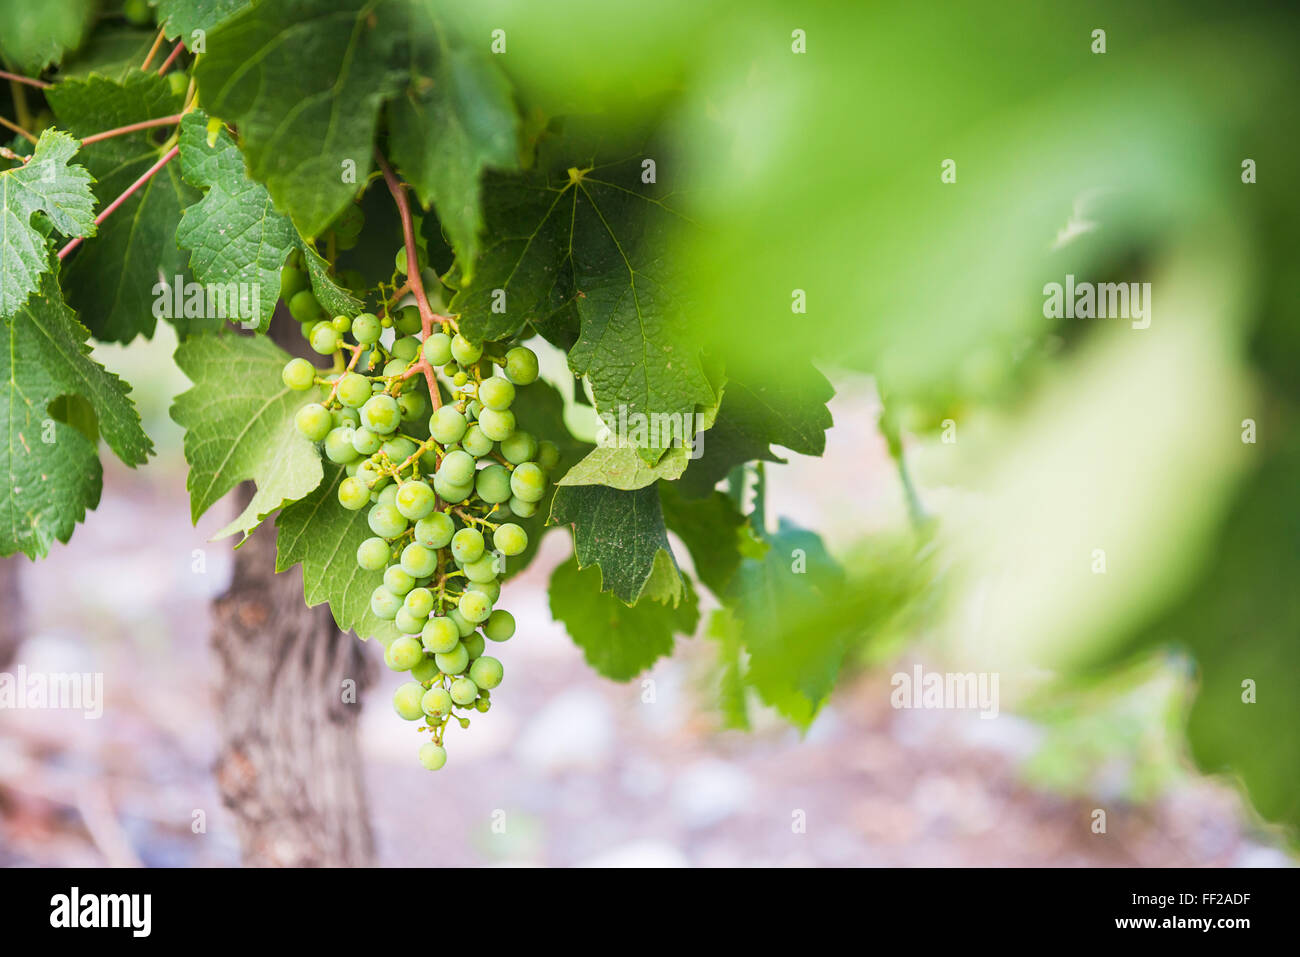 Grapes hanging on a vine at Bodega RMa AzuRM, a winery in Uco VaRMRMey (VaRMRMe de Uco), a wine region in Mendoza Province, Argentina Stock Photo